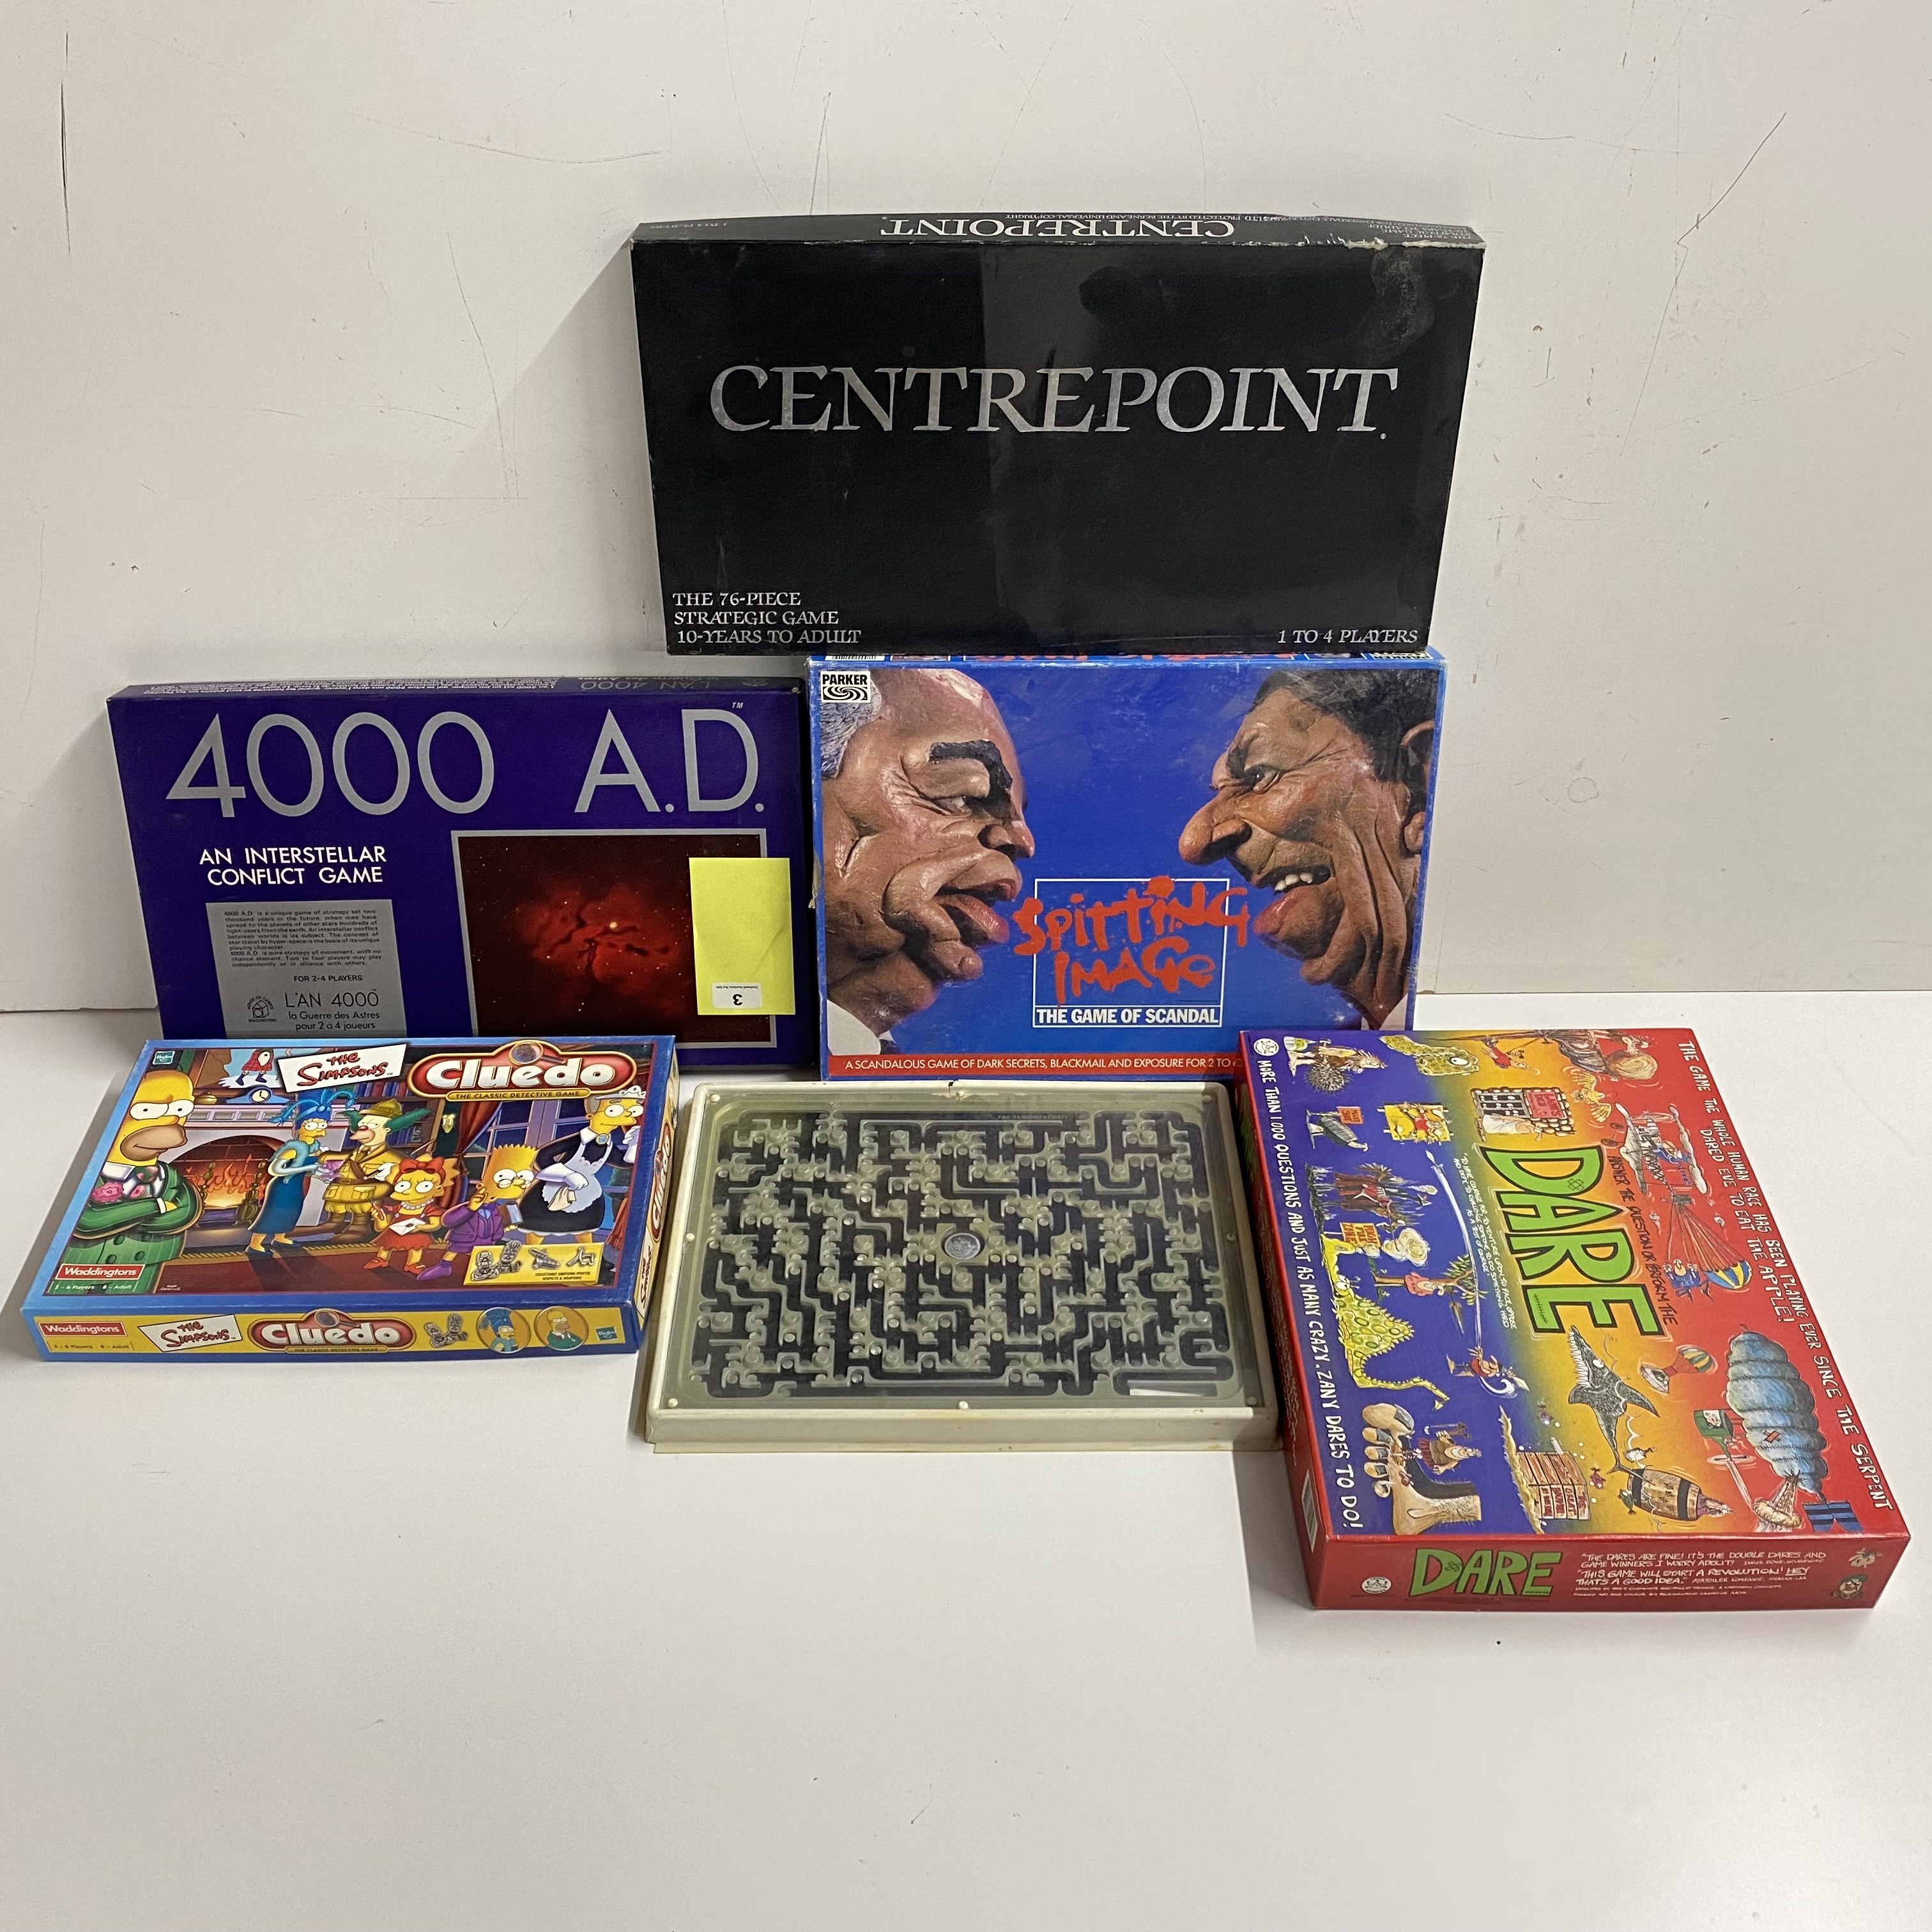 Six board games including Spitting Image.